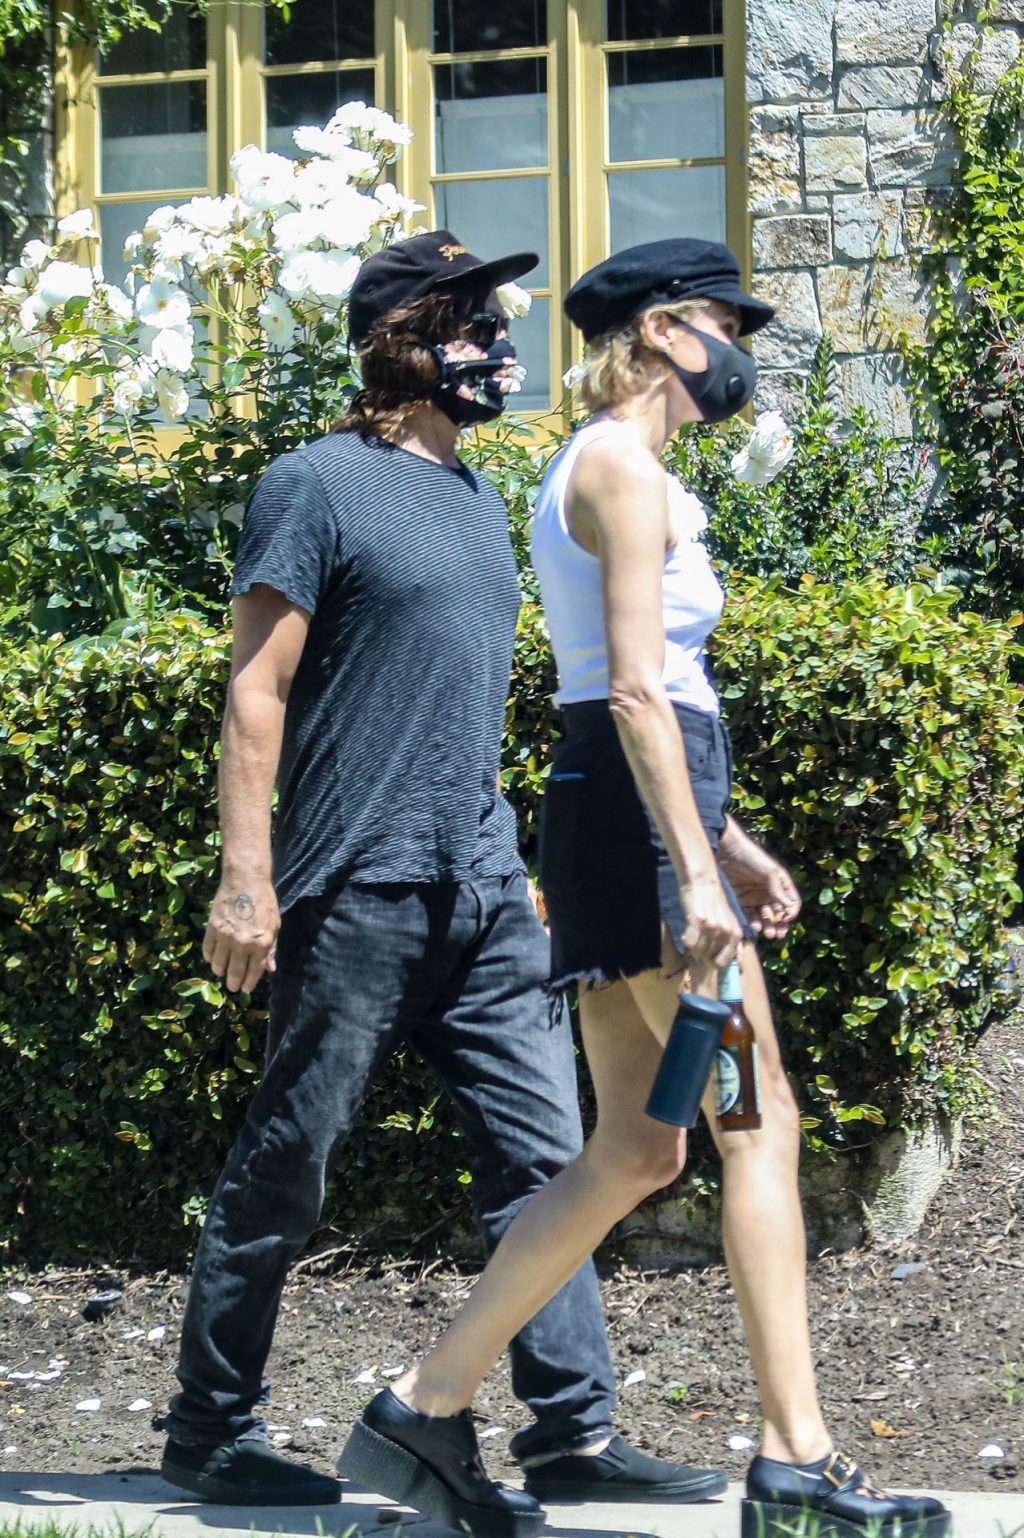 Diane Kruger &amp; Norman Reedus Attend a House Party During the COVID-19 Outbreak (27 Photos)